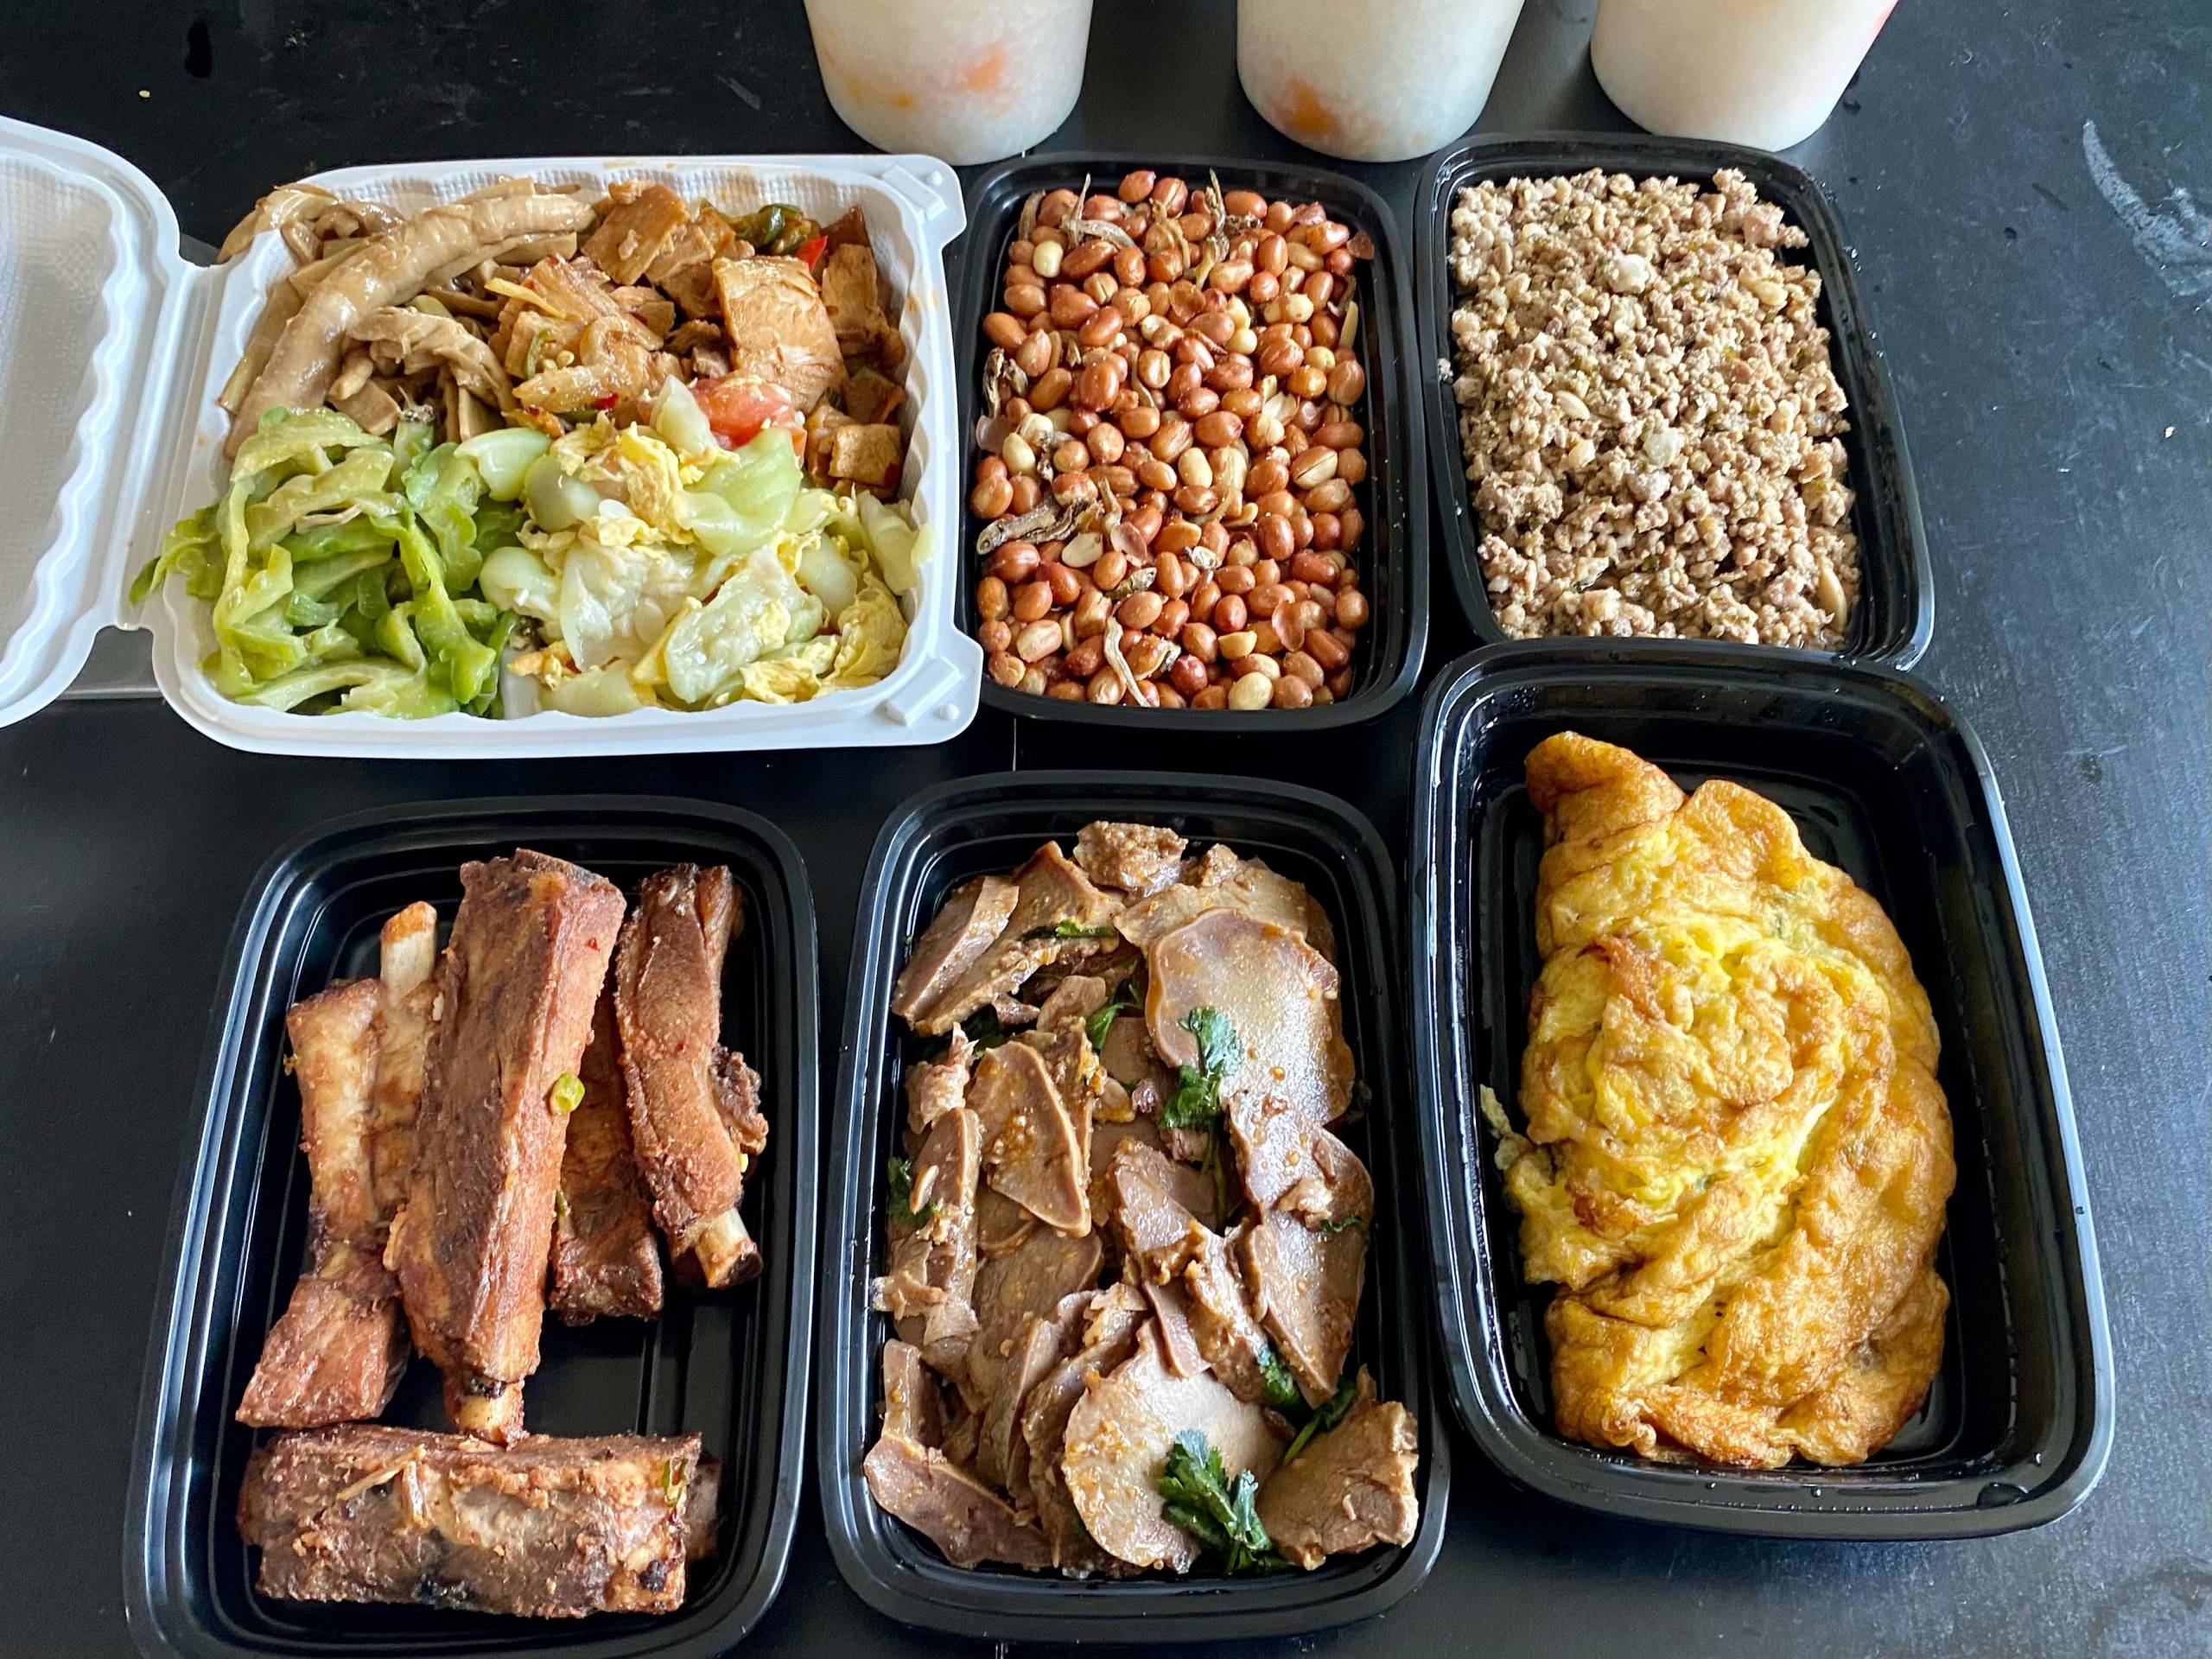 Side dishes to be eaten with Taiwan Porridge Kingdom's sweet potato congee: pork ribs, pig's tongue, a dried radish omelet, fried peanuts and more.